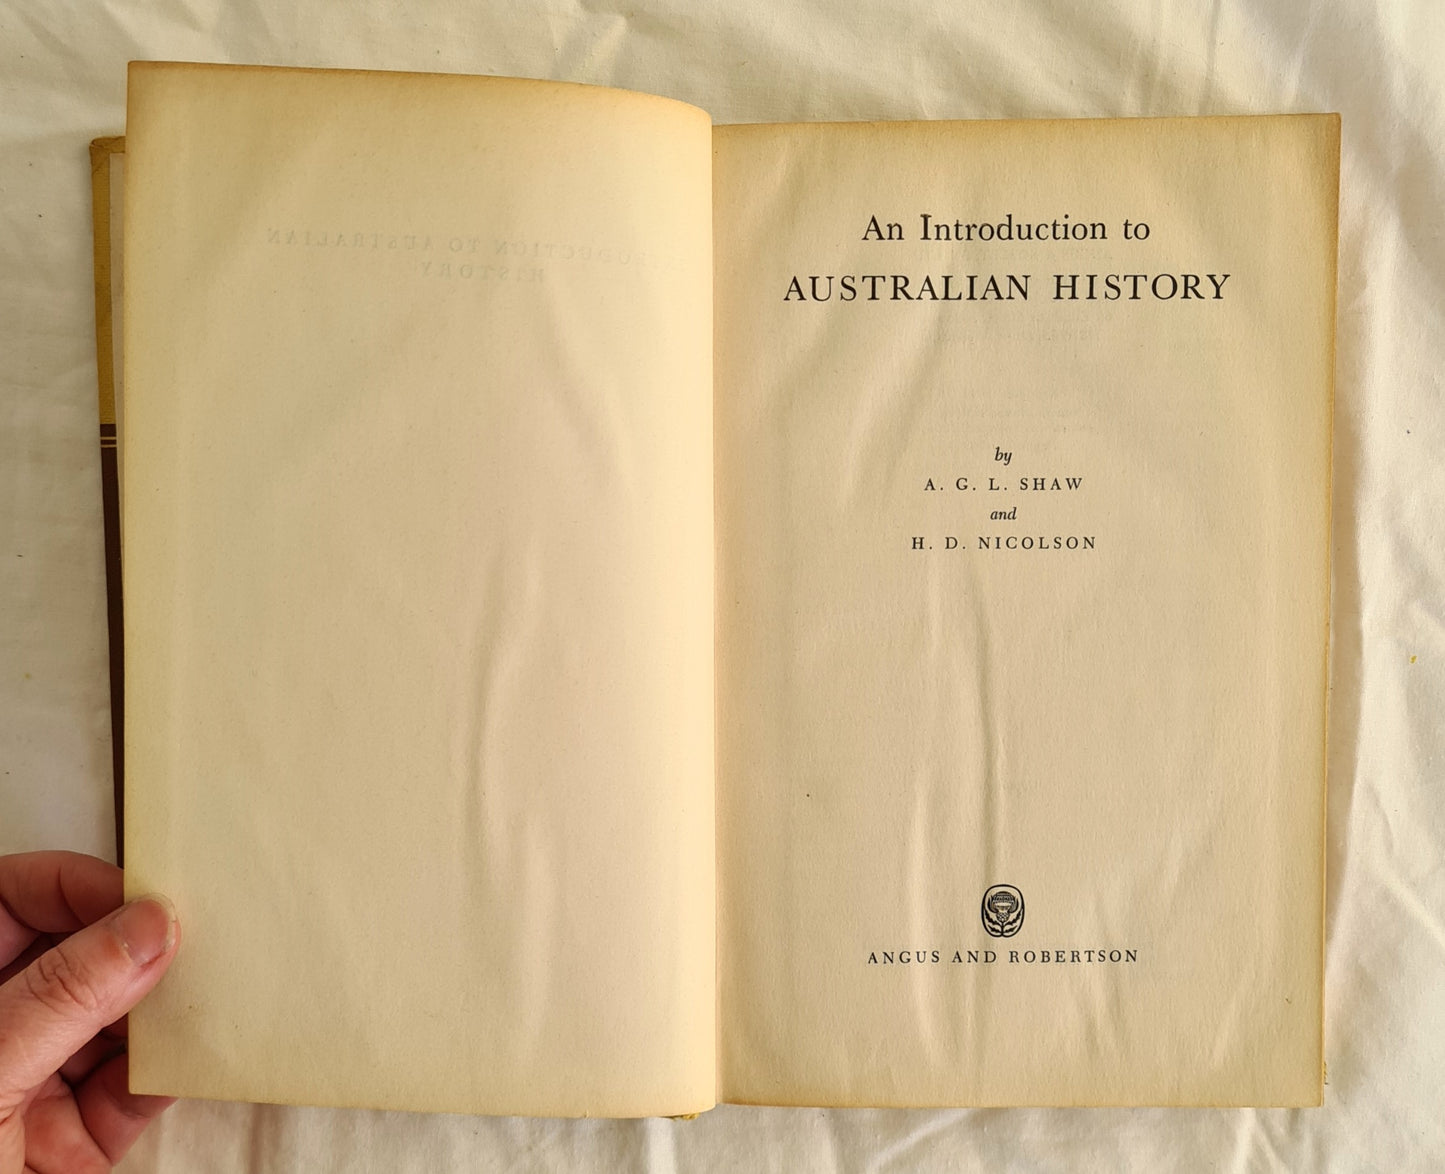 An Introduction to Australian History by A. G. L. Shaw and H. D. Nicolson